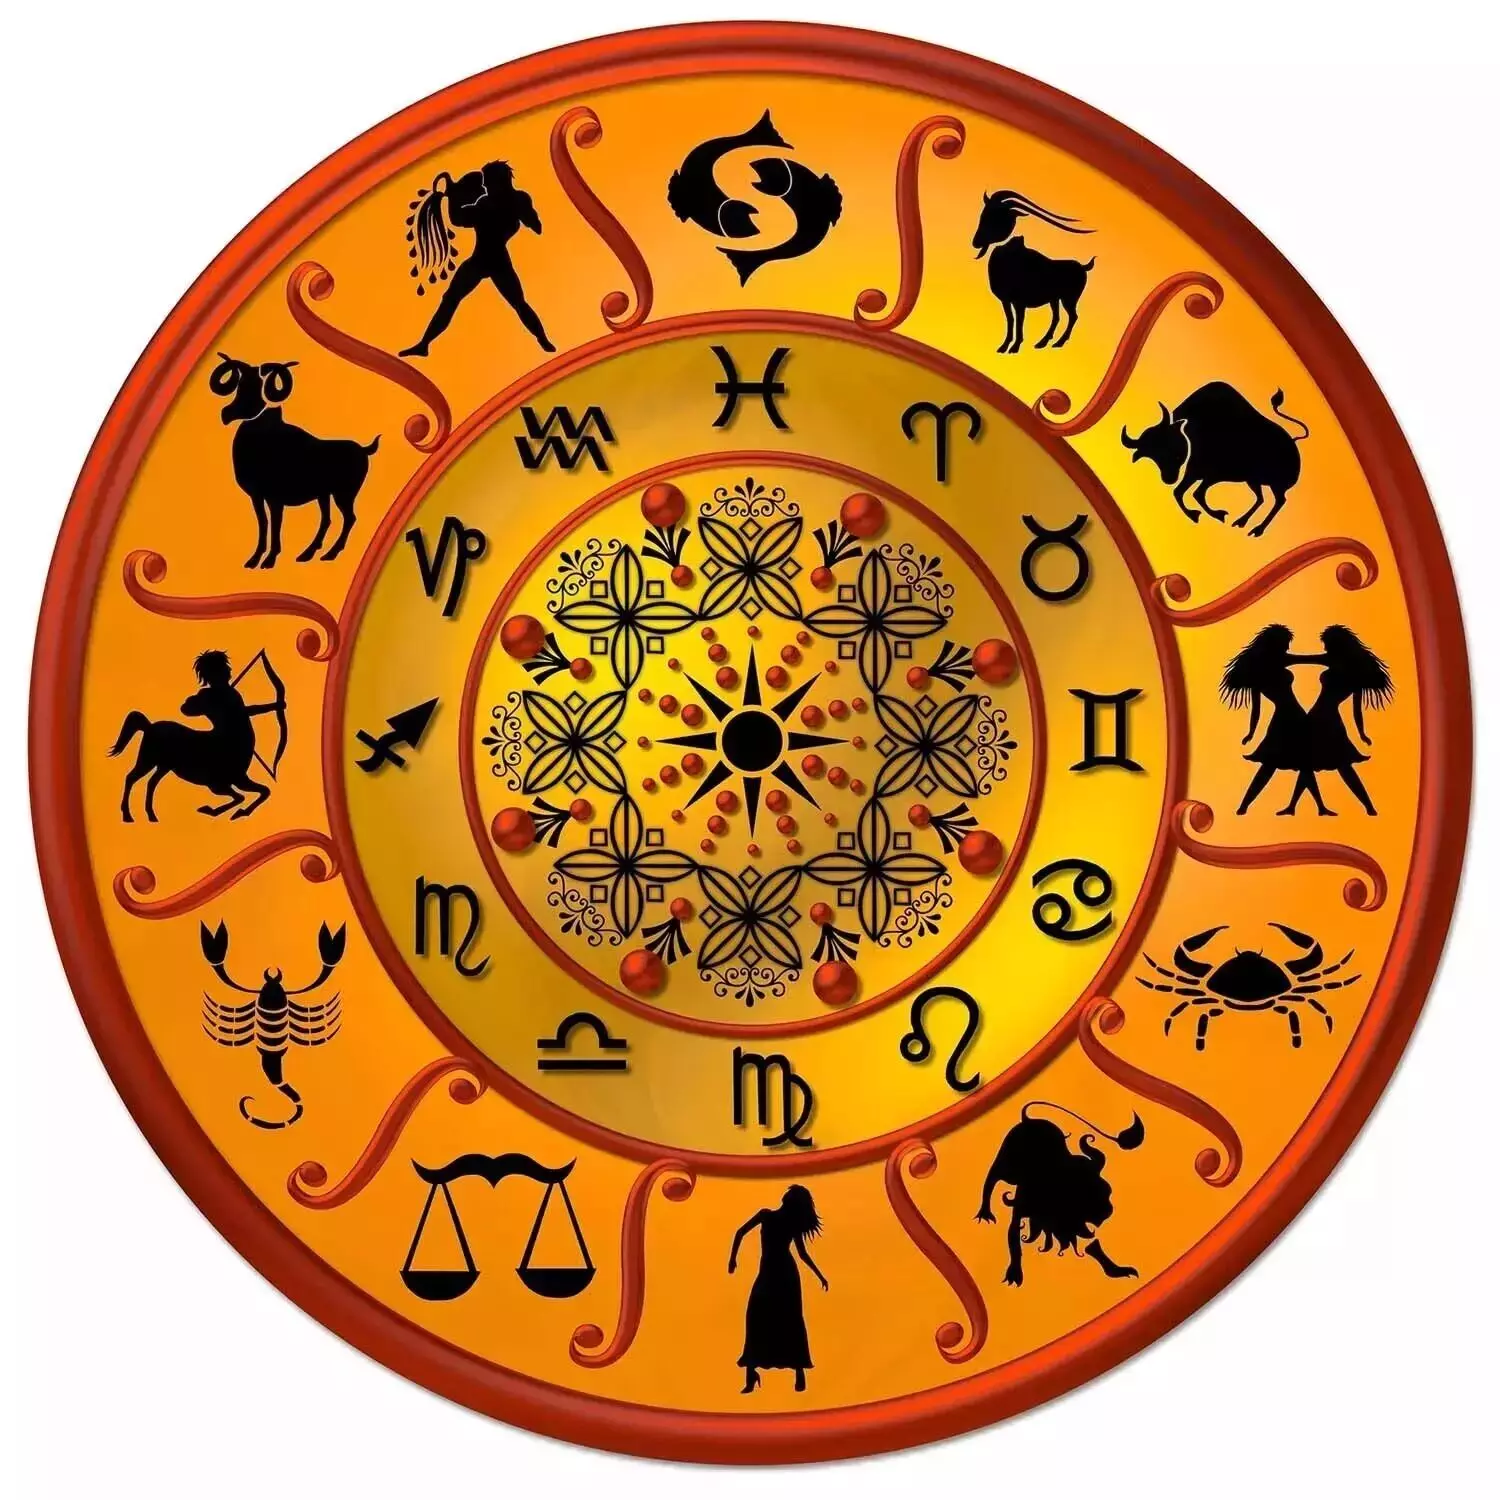 05 June  – Know your todays horoscope